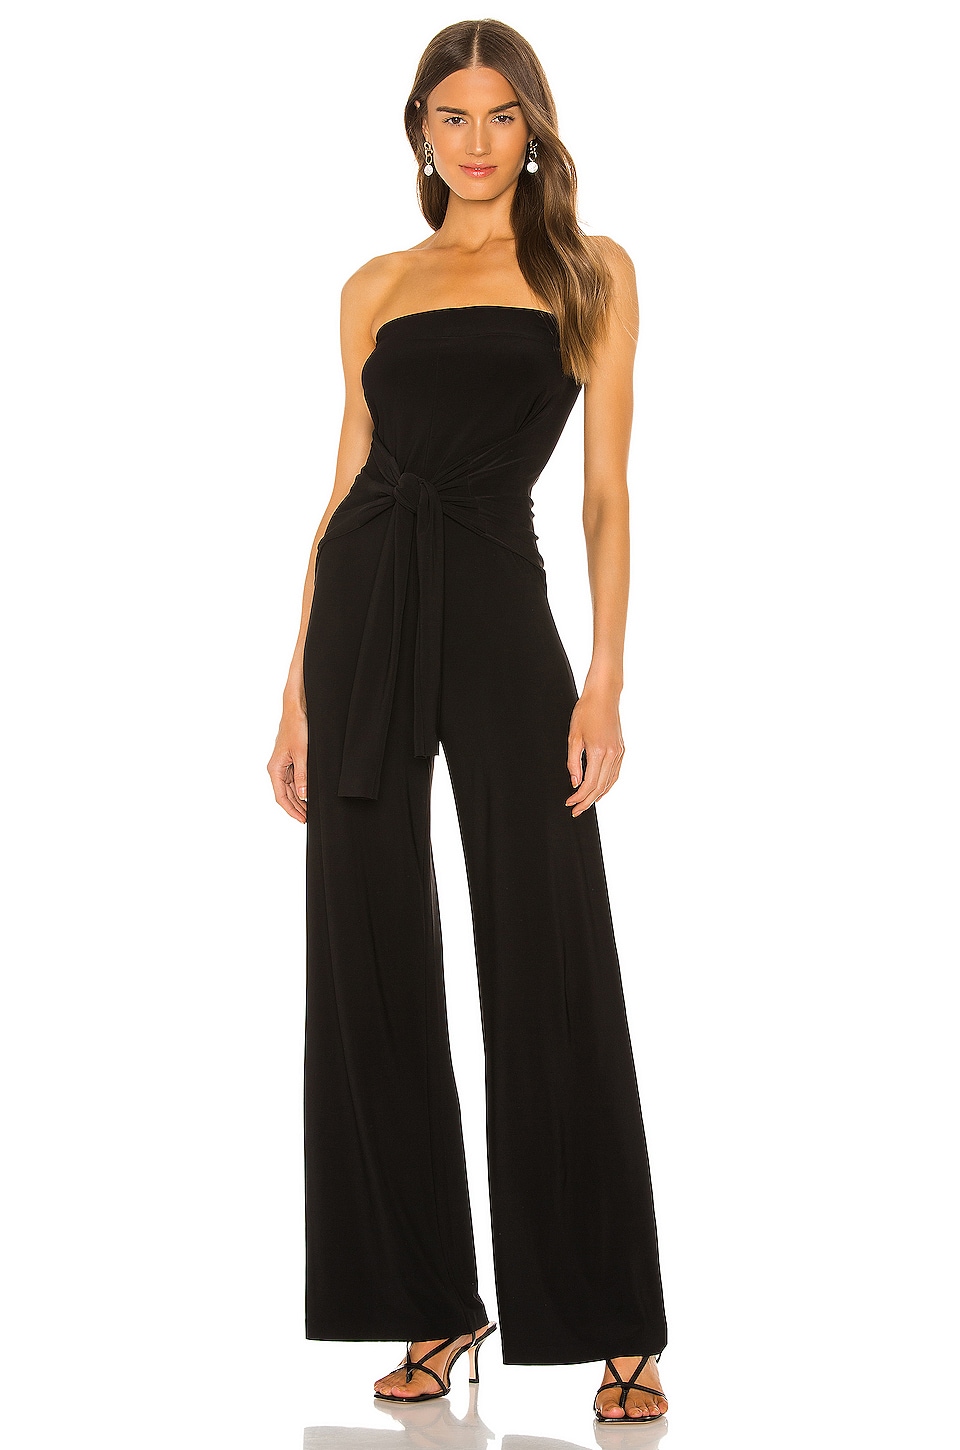 Norma Kamali Tie Front All In One Strapless Jumpsuit in Black | REVOLVE